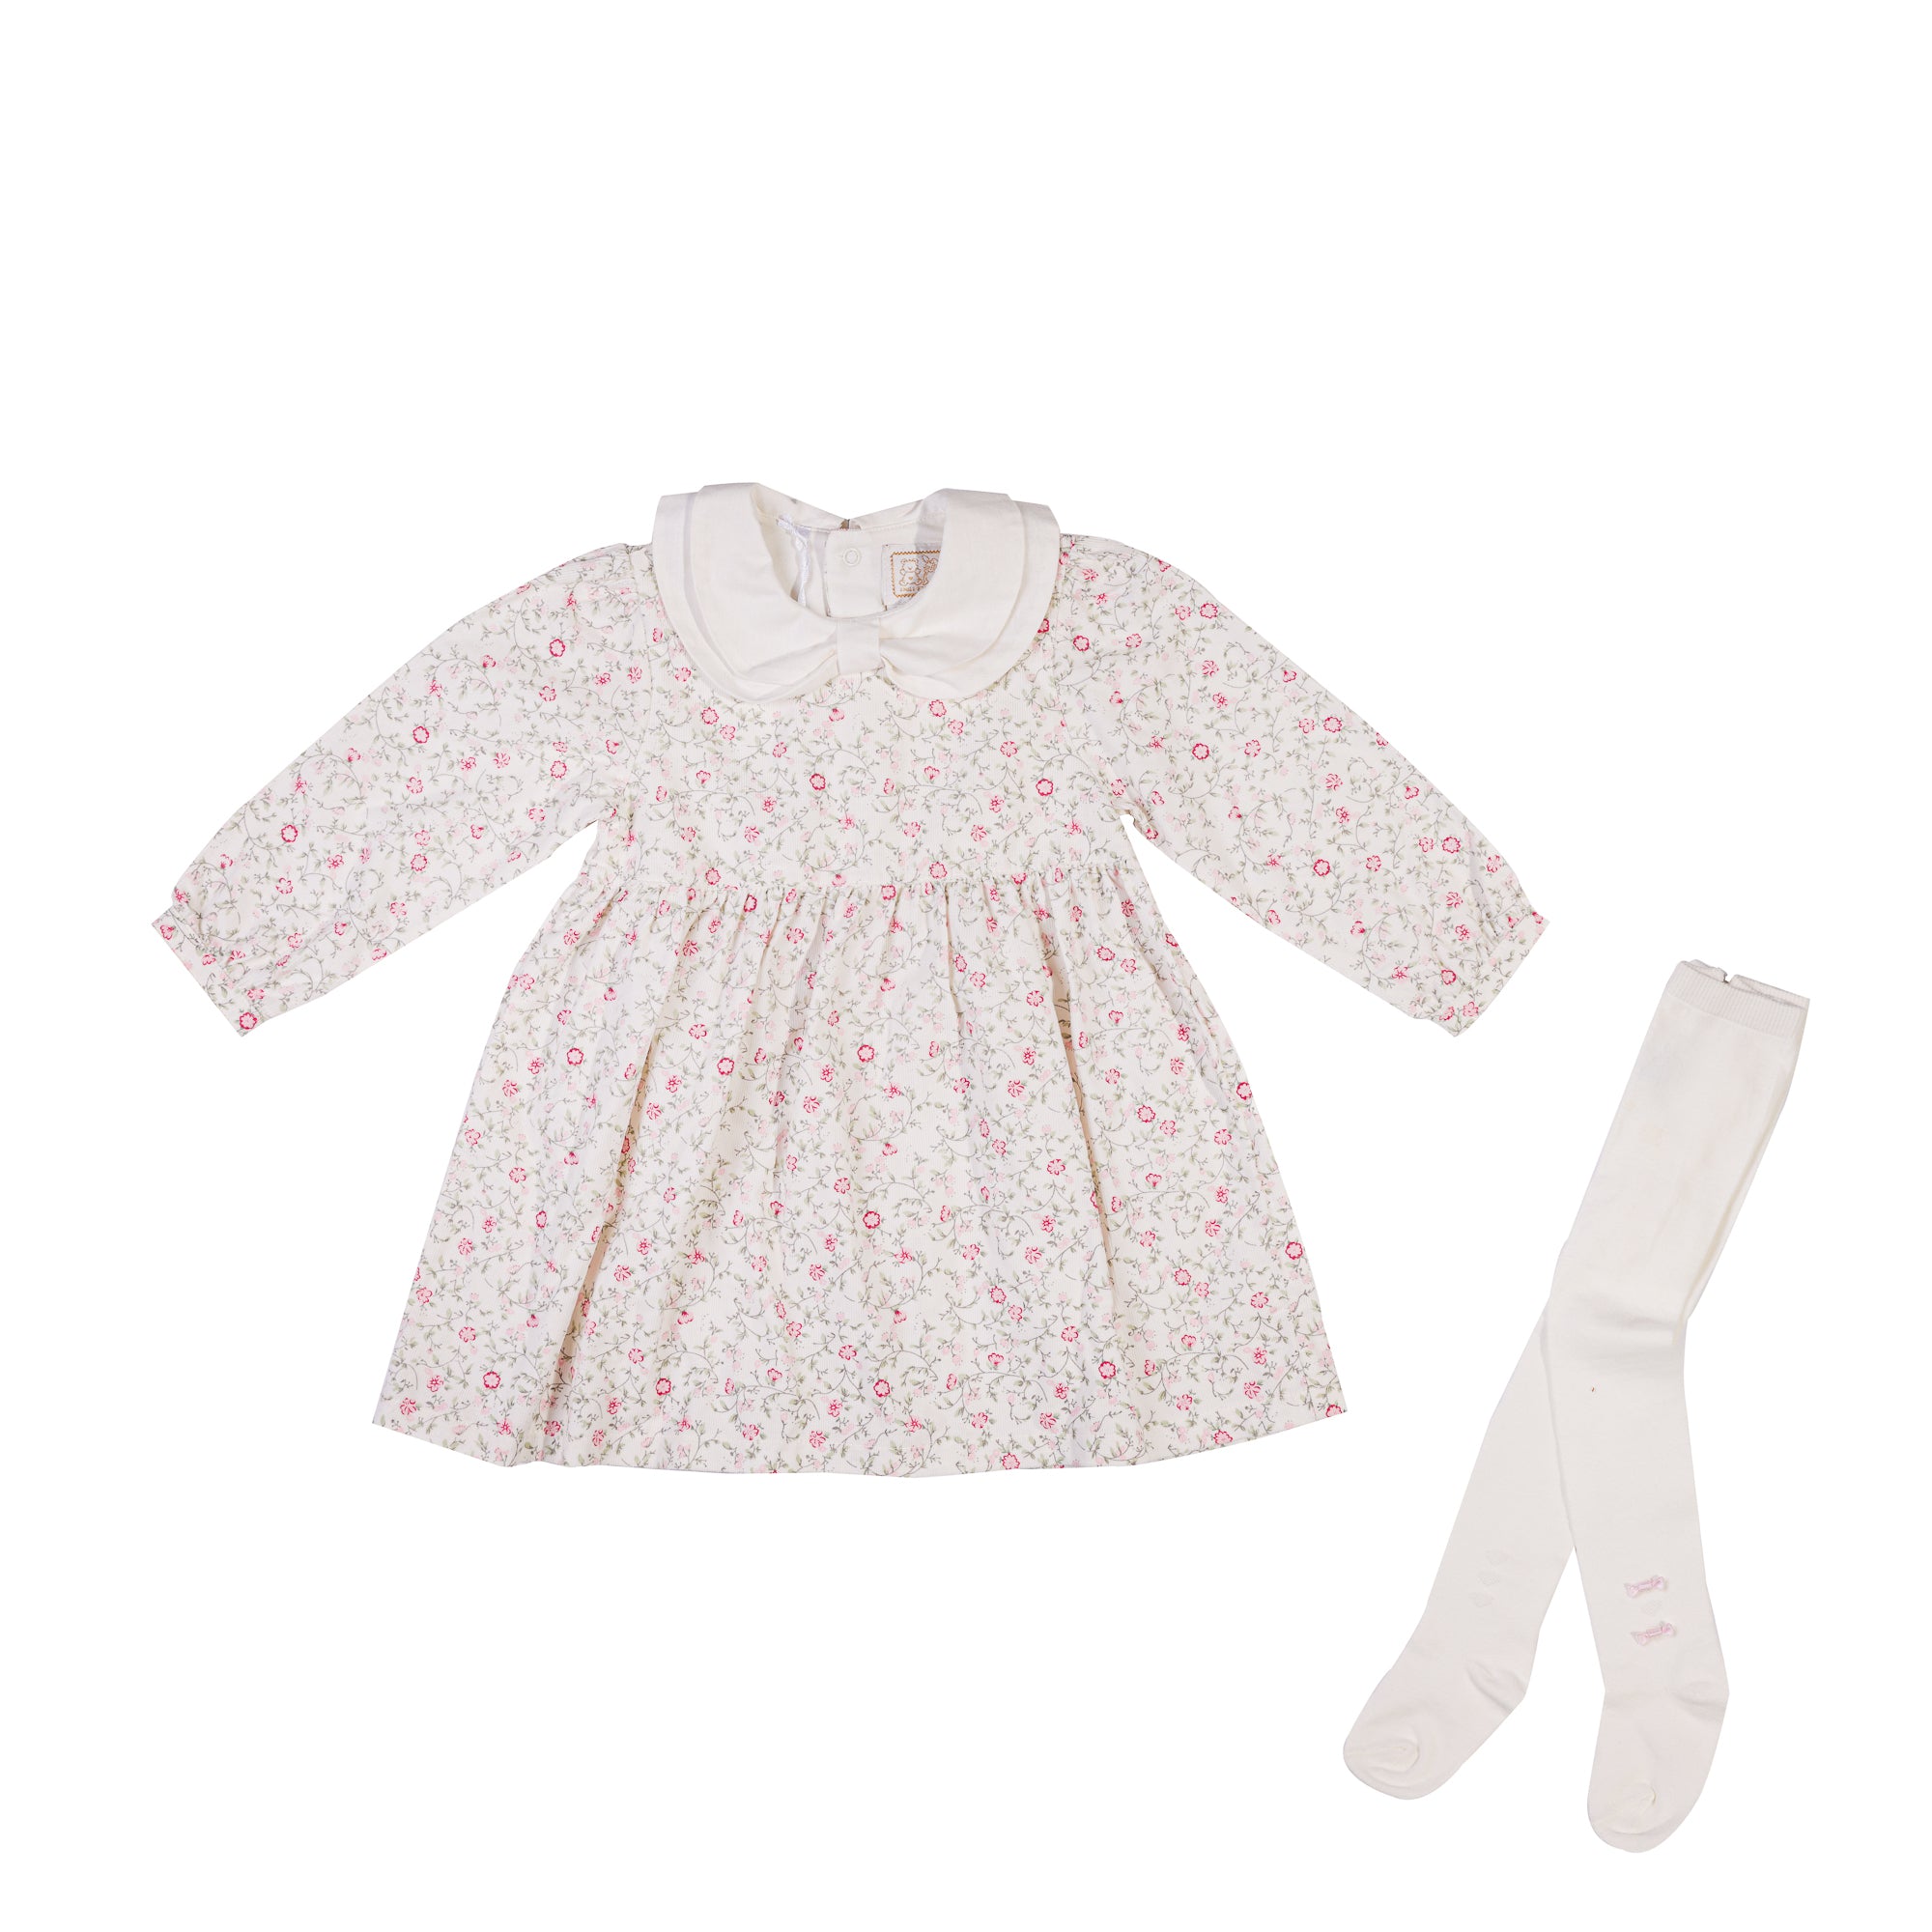 long sleeves floral cotton dress with matching tights for baby girl in light pink